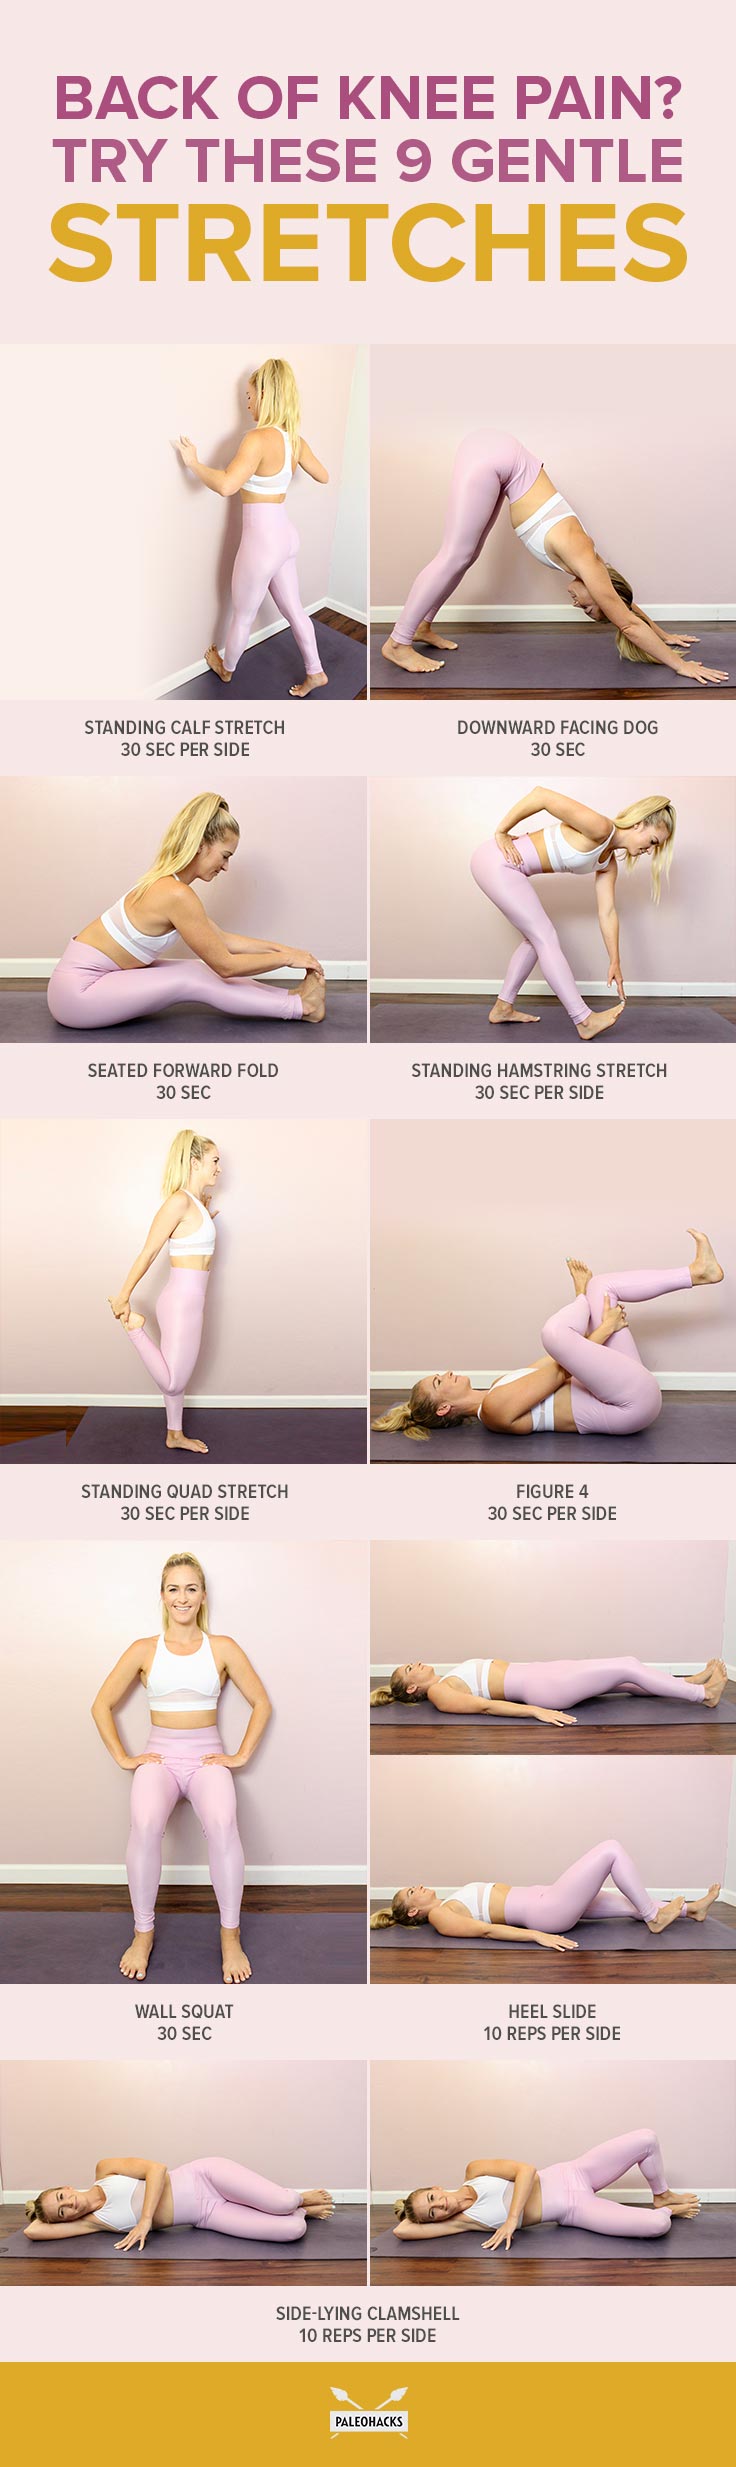 Stretches for back of knee pain